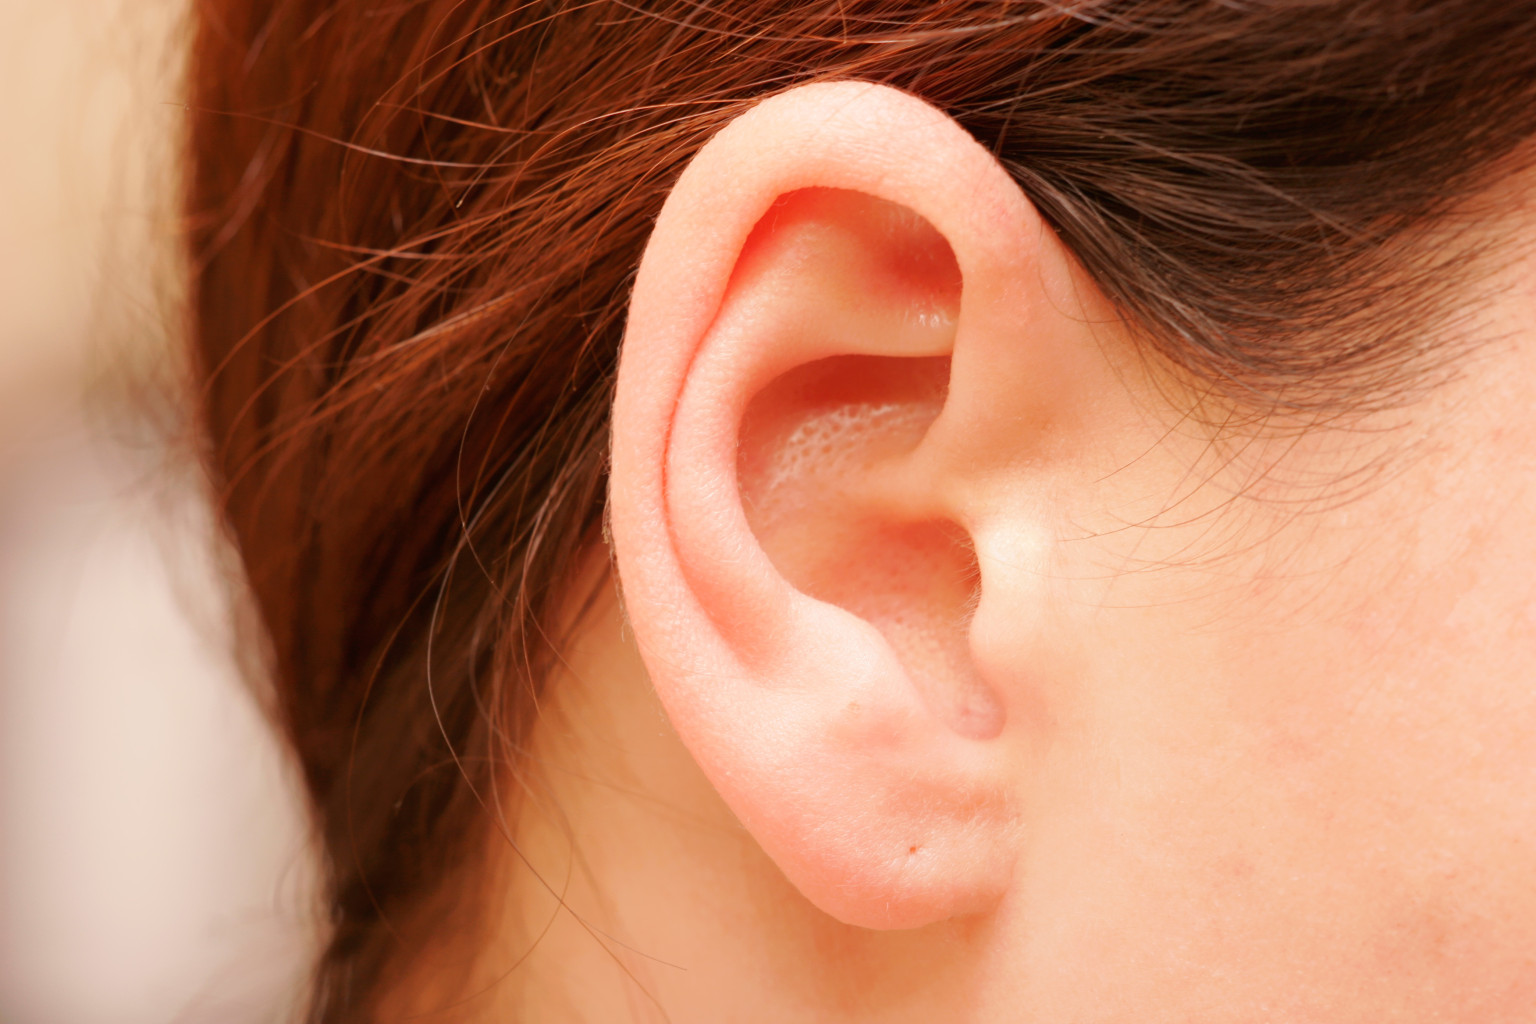 ear infection remedies adults infections huffpost diy behind wax ears symptoms pain eardrum inner problems inflammation hearing earwax inside causes